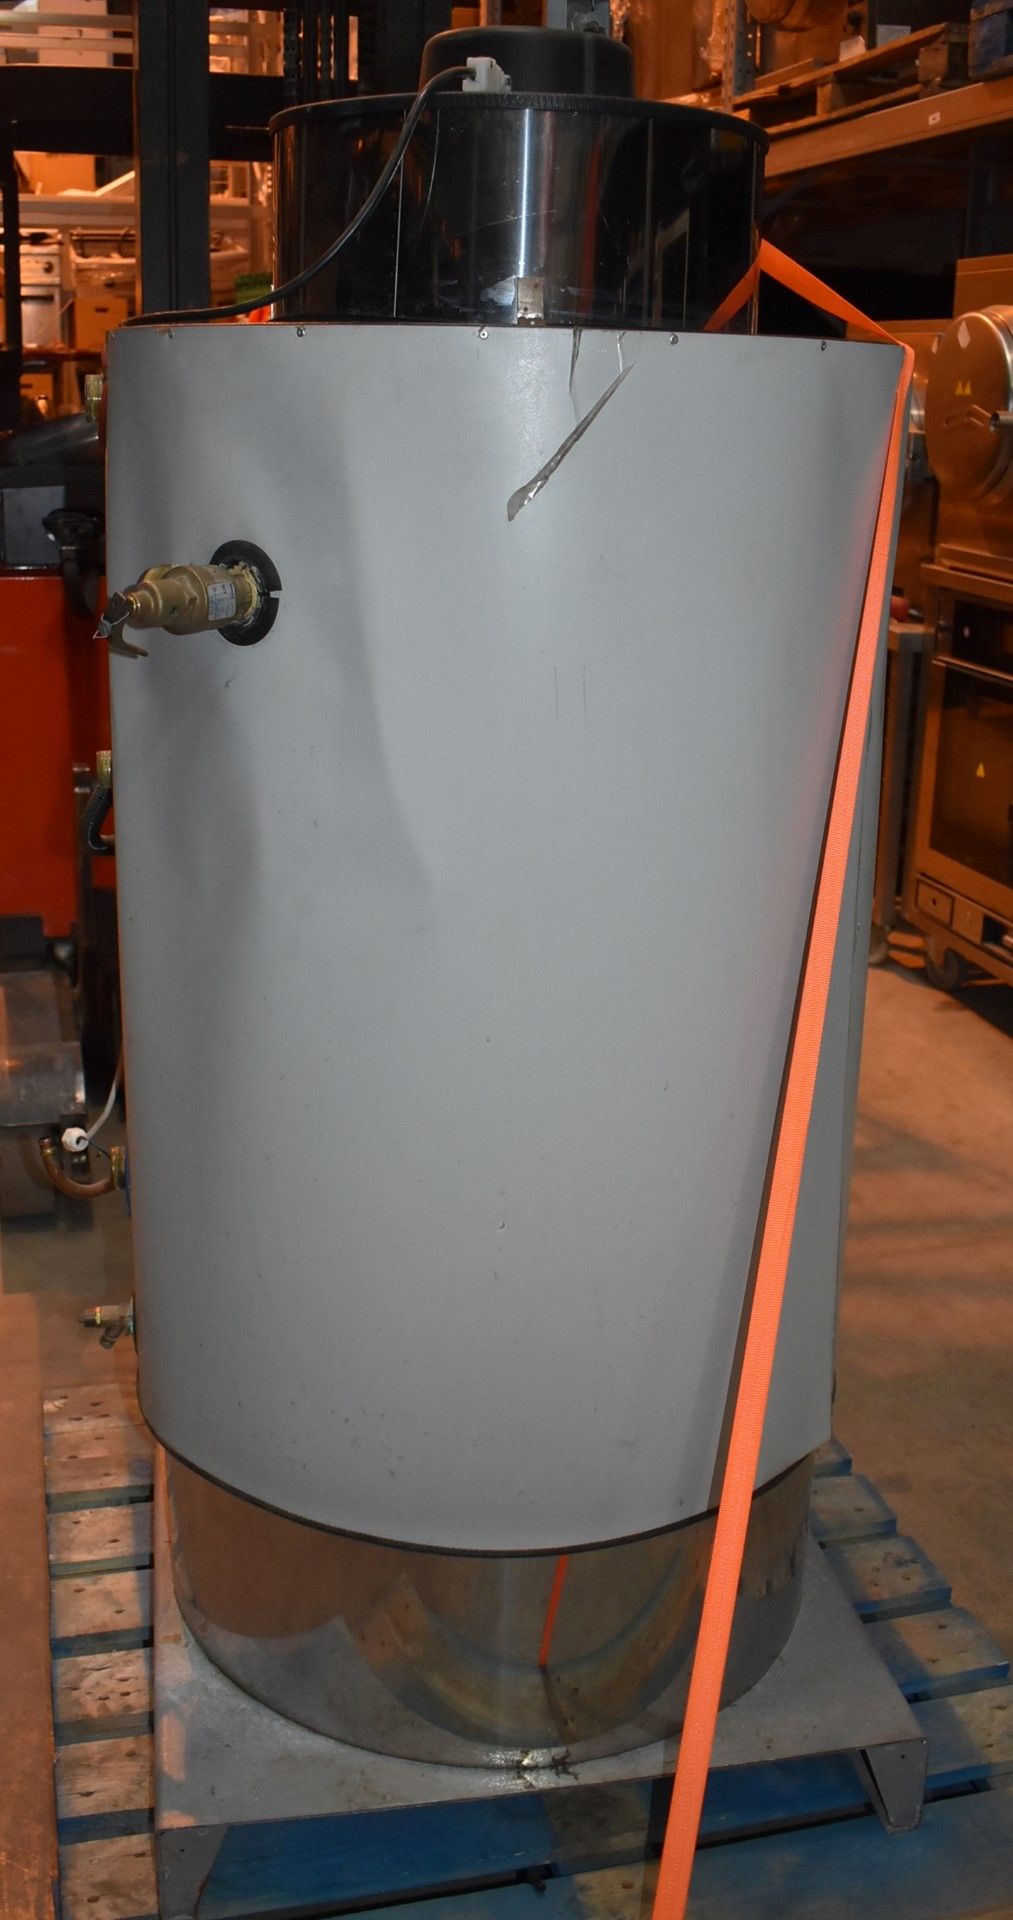 1 x Lochinvar High Efficiency Gas Fired 220L Storage Water Heater - Model LBF-220 - Ref: WH2-145 H5D - Image 5 of 14